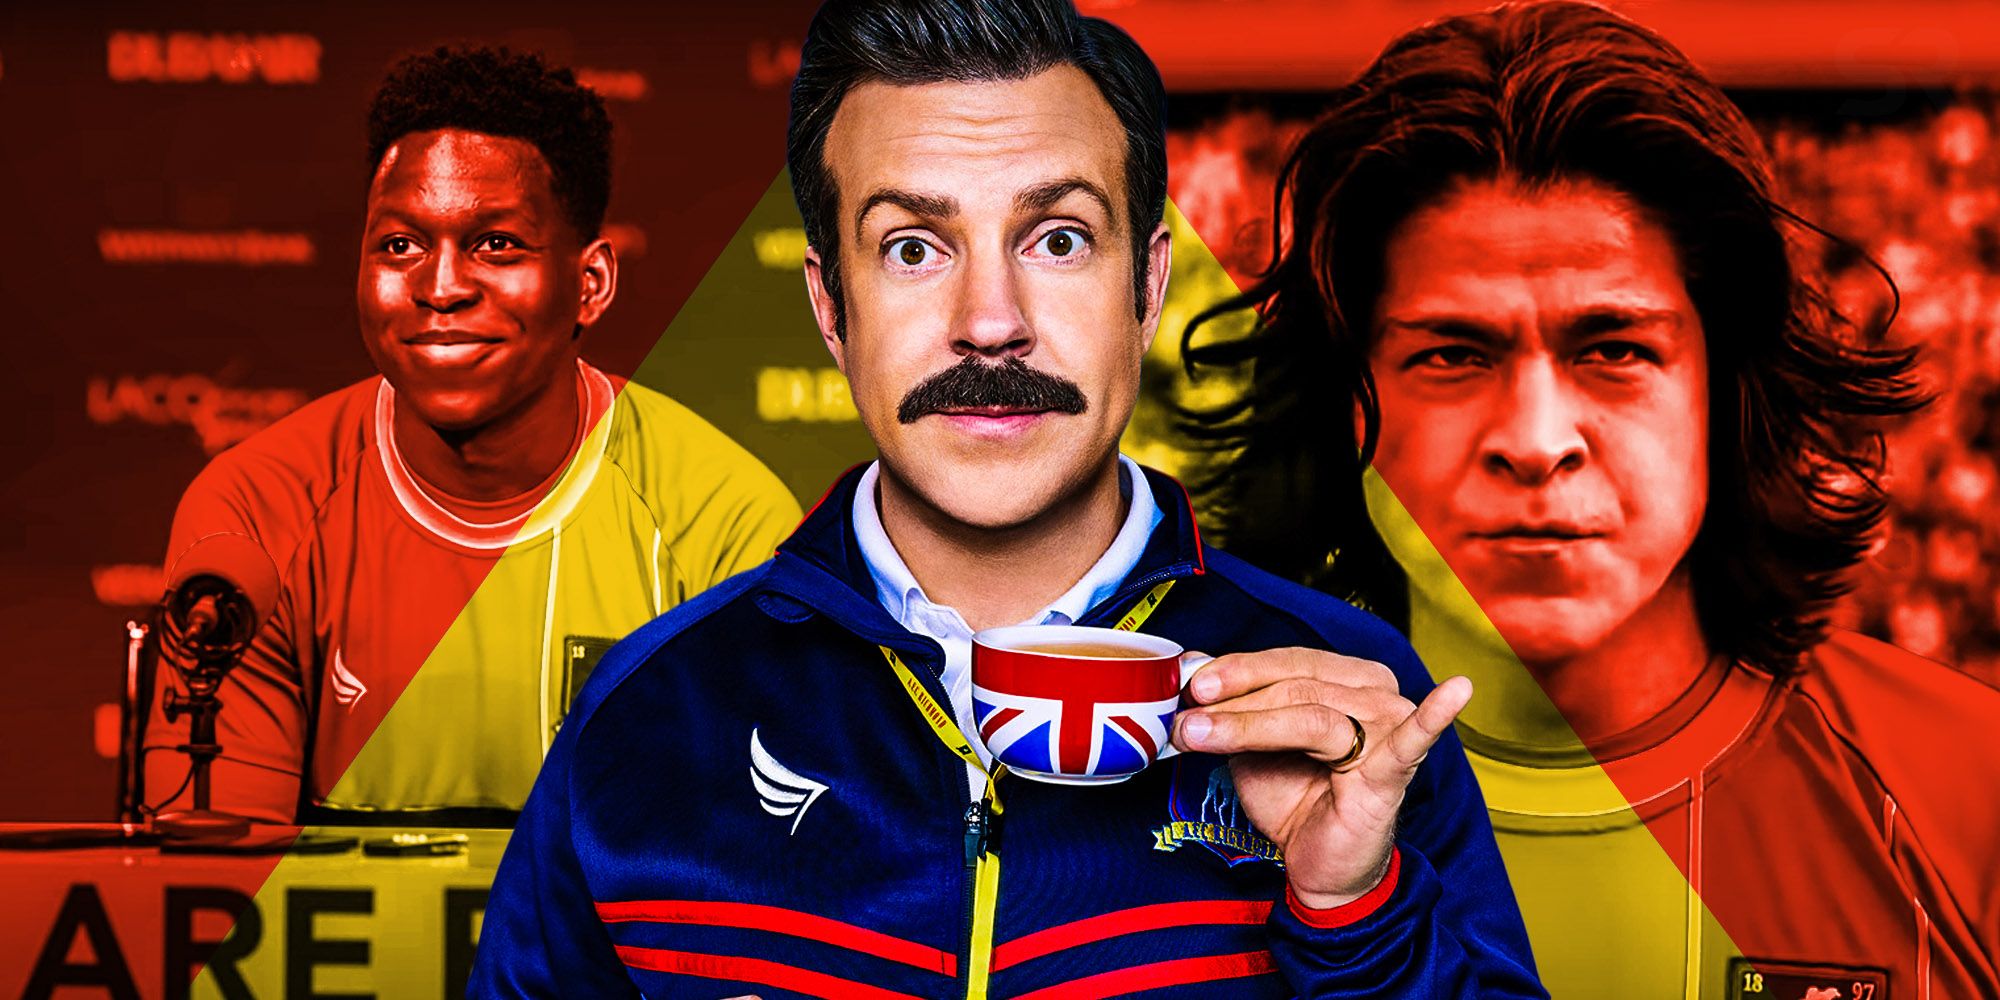 Do any real footballers make cameos in Ted Lasso?